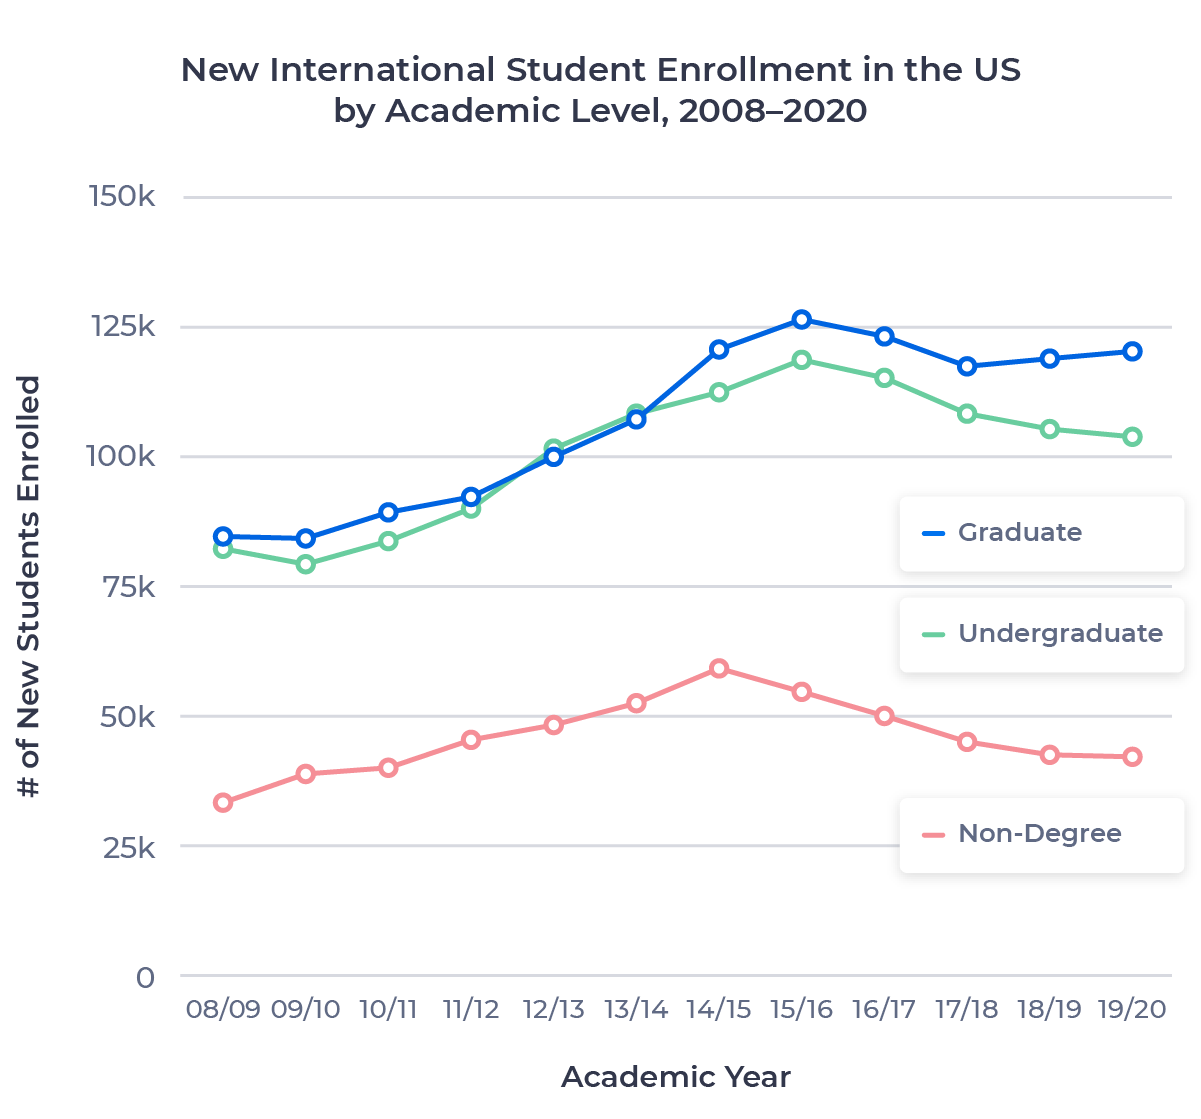 Line chart showing new international student enrollment in the US by academic level from the 08/09 to 19/20 academic years. Examined in detail below.